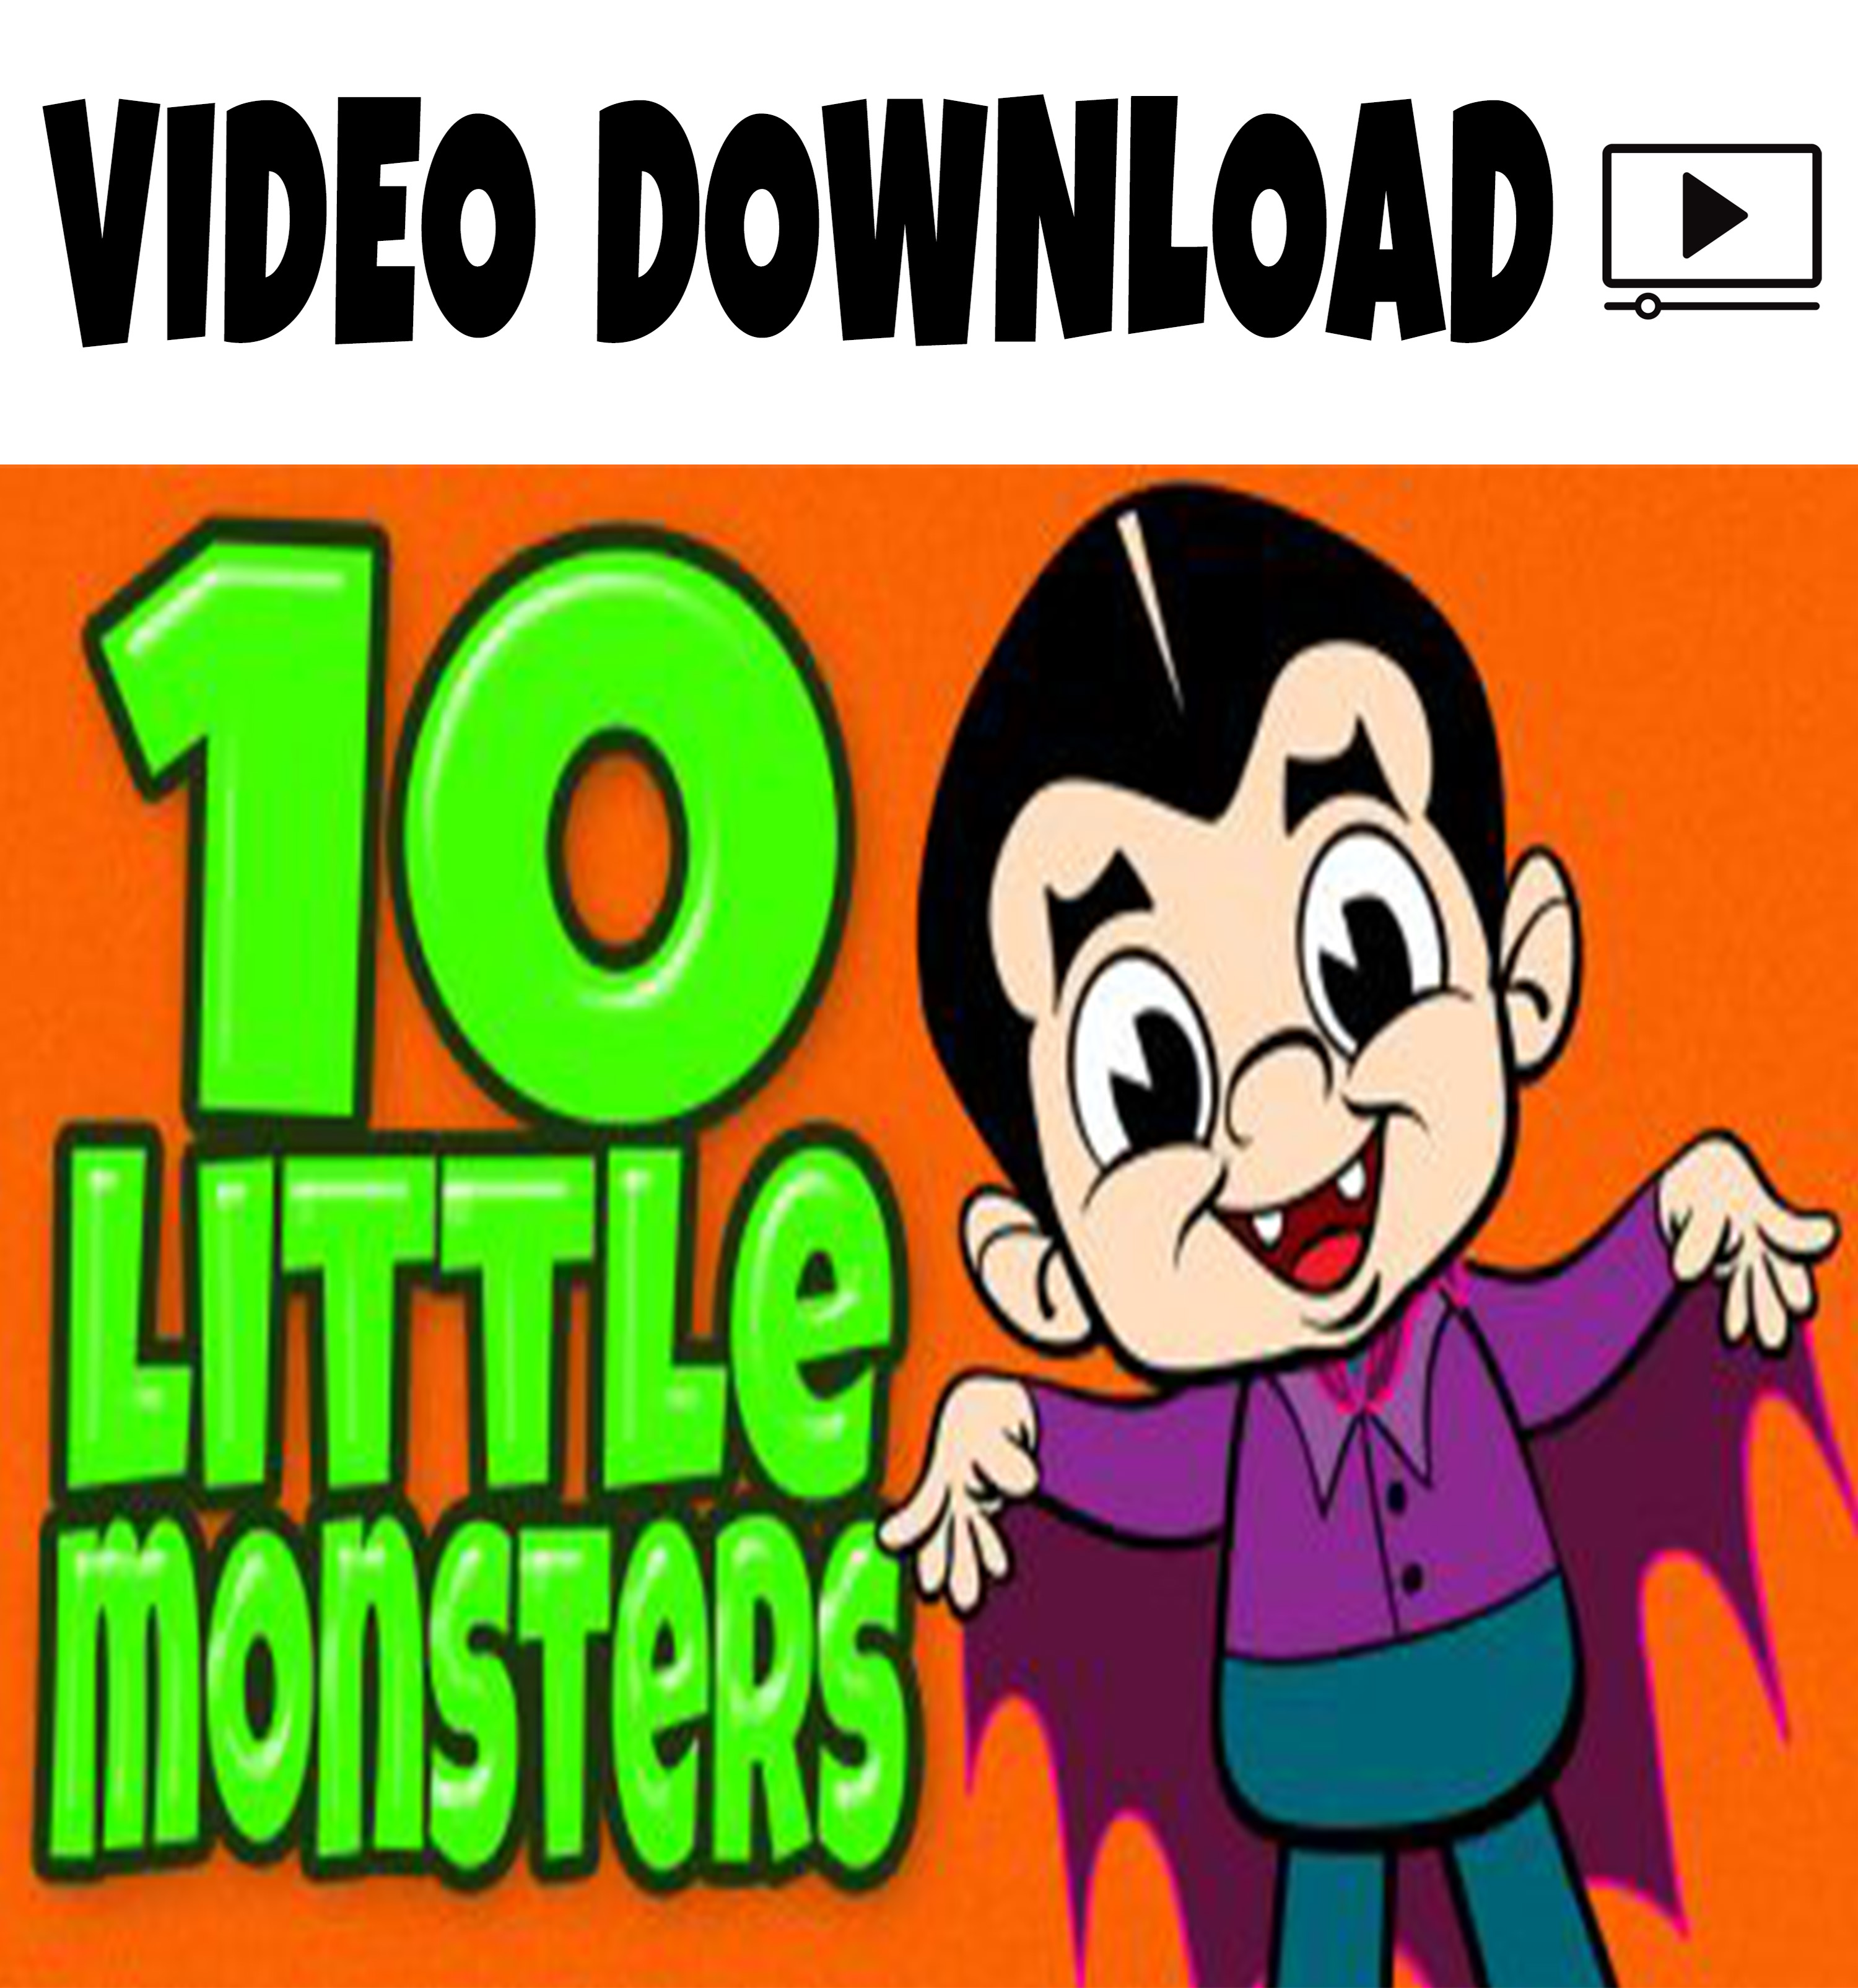 10 Little Monsters Video Download | The Learning Station